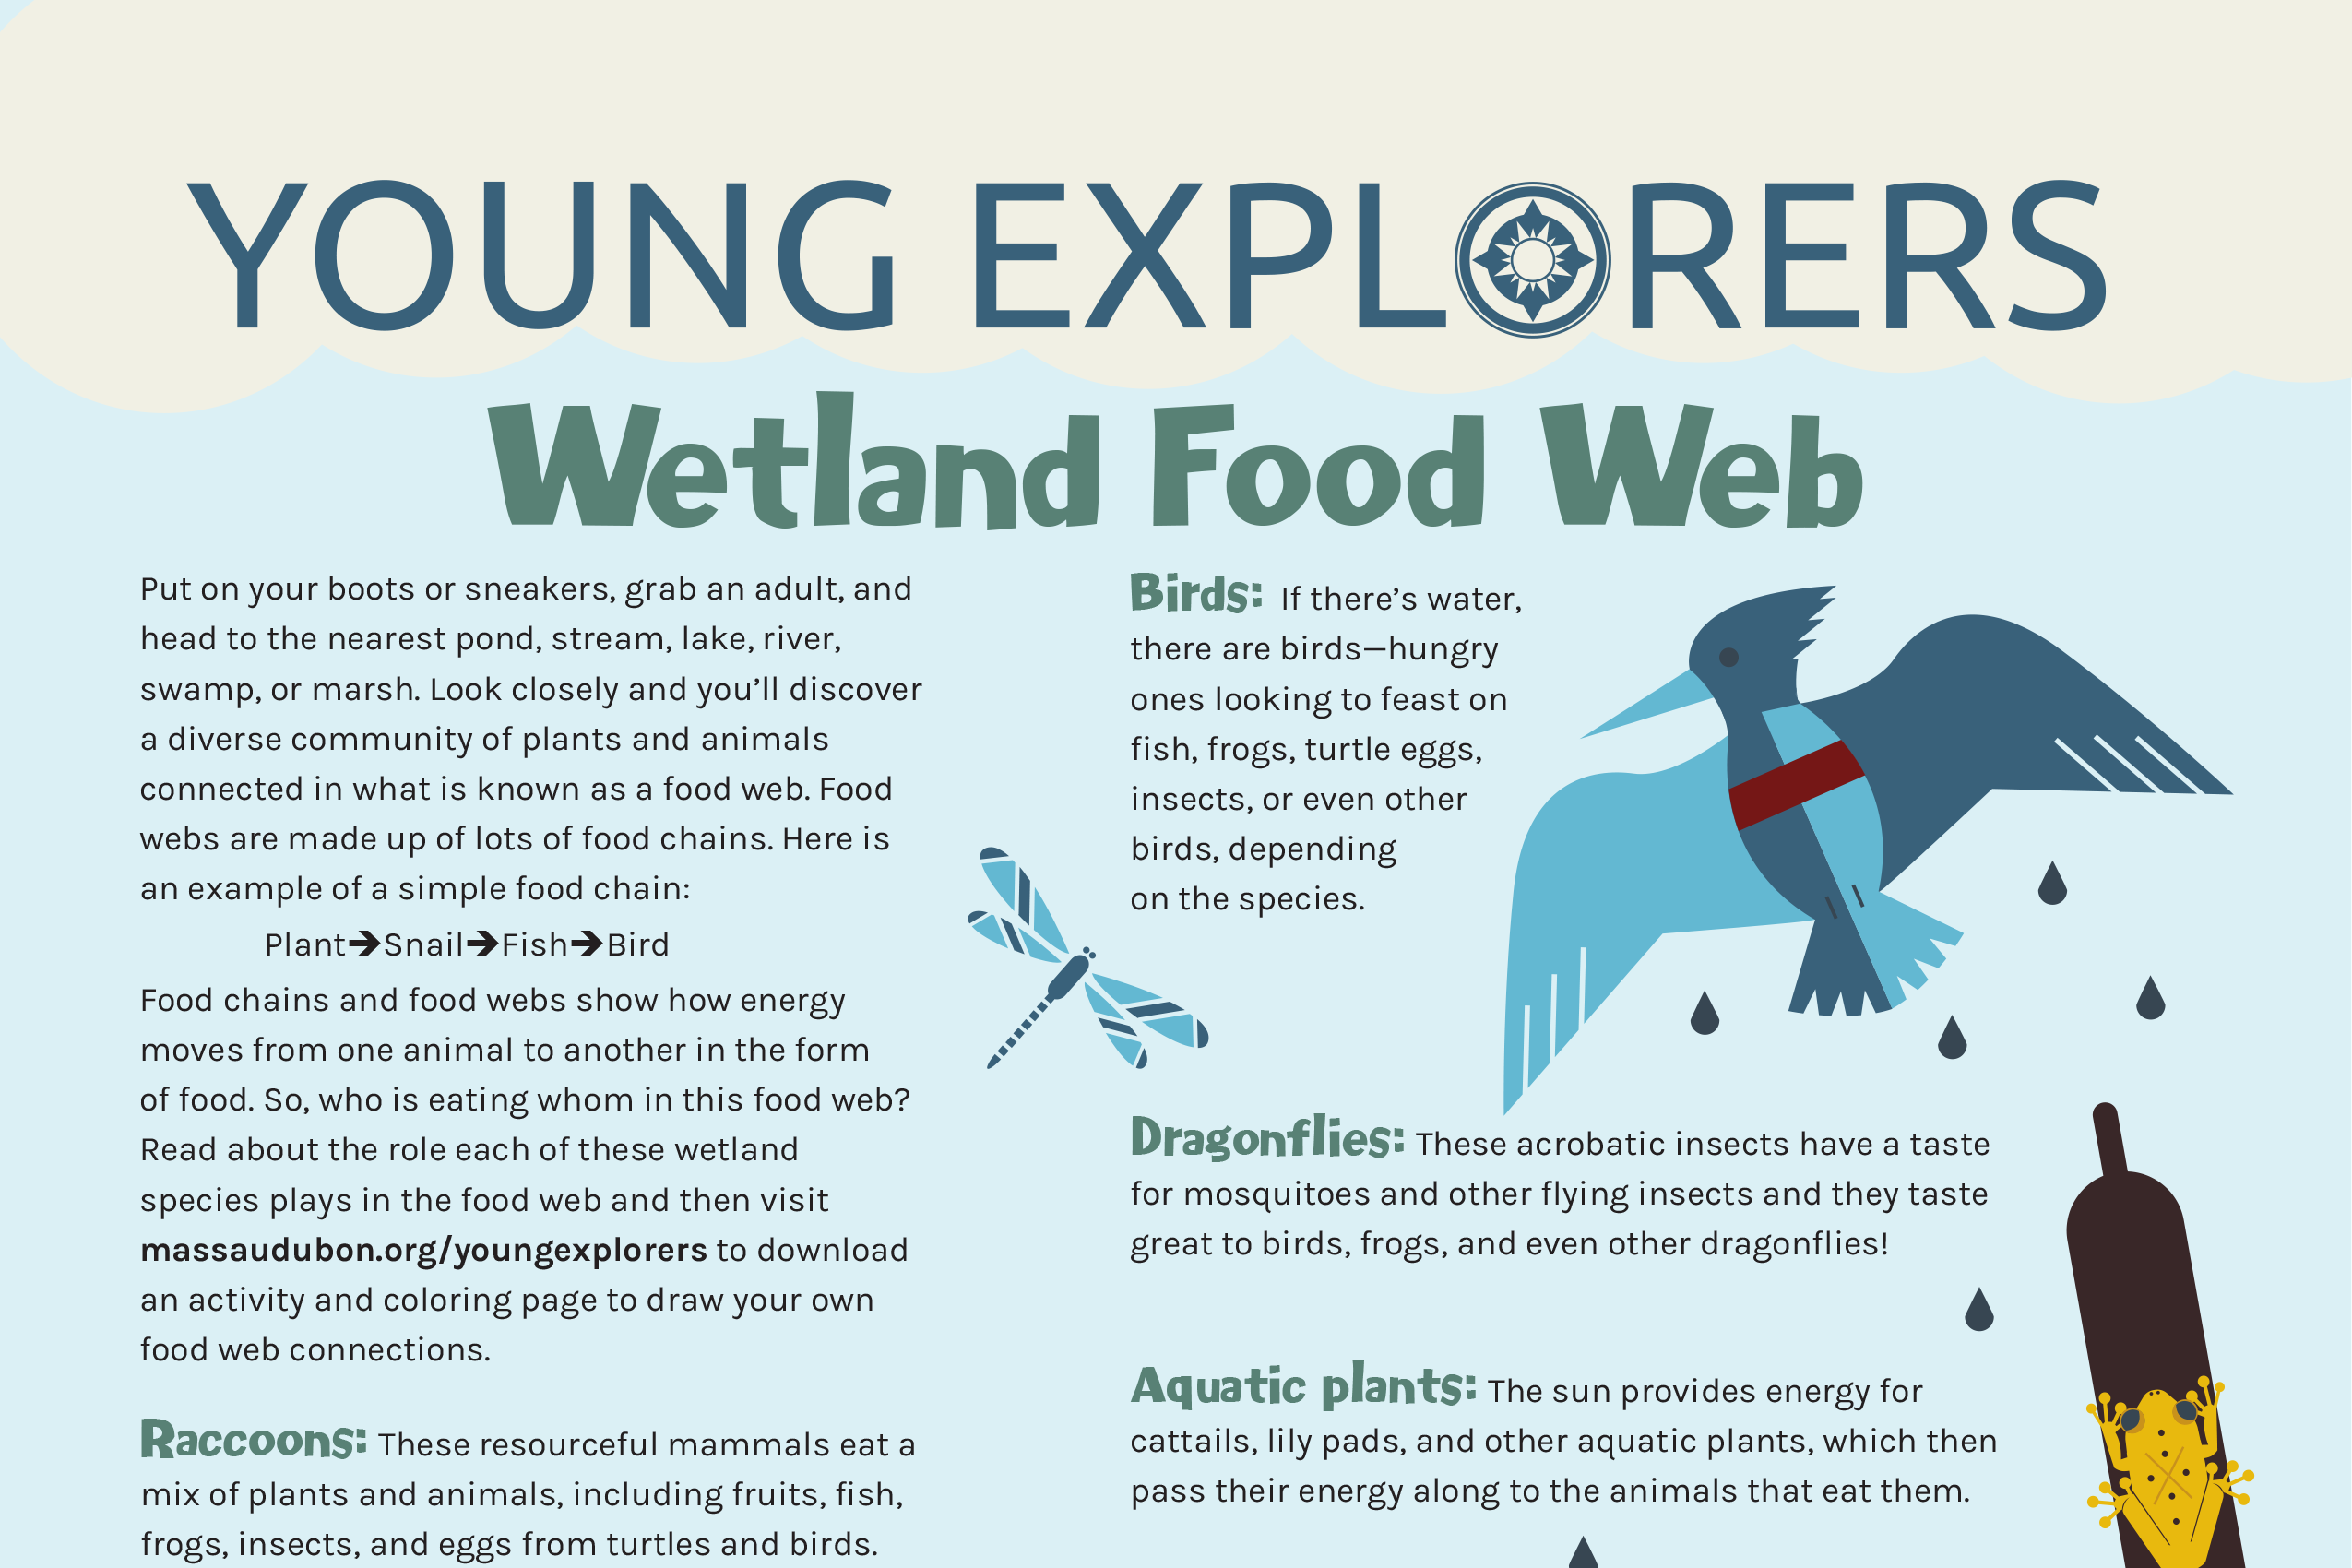 Preview of the Wetland Food Web activity sheet